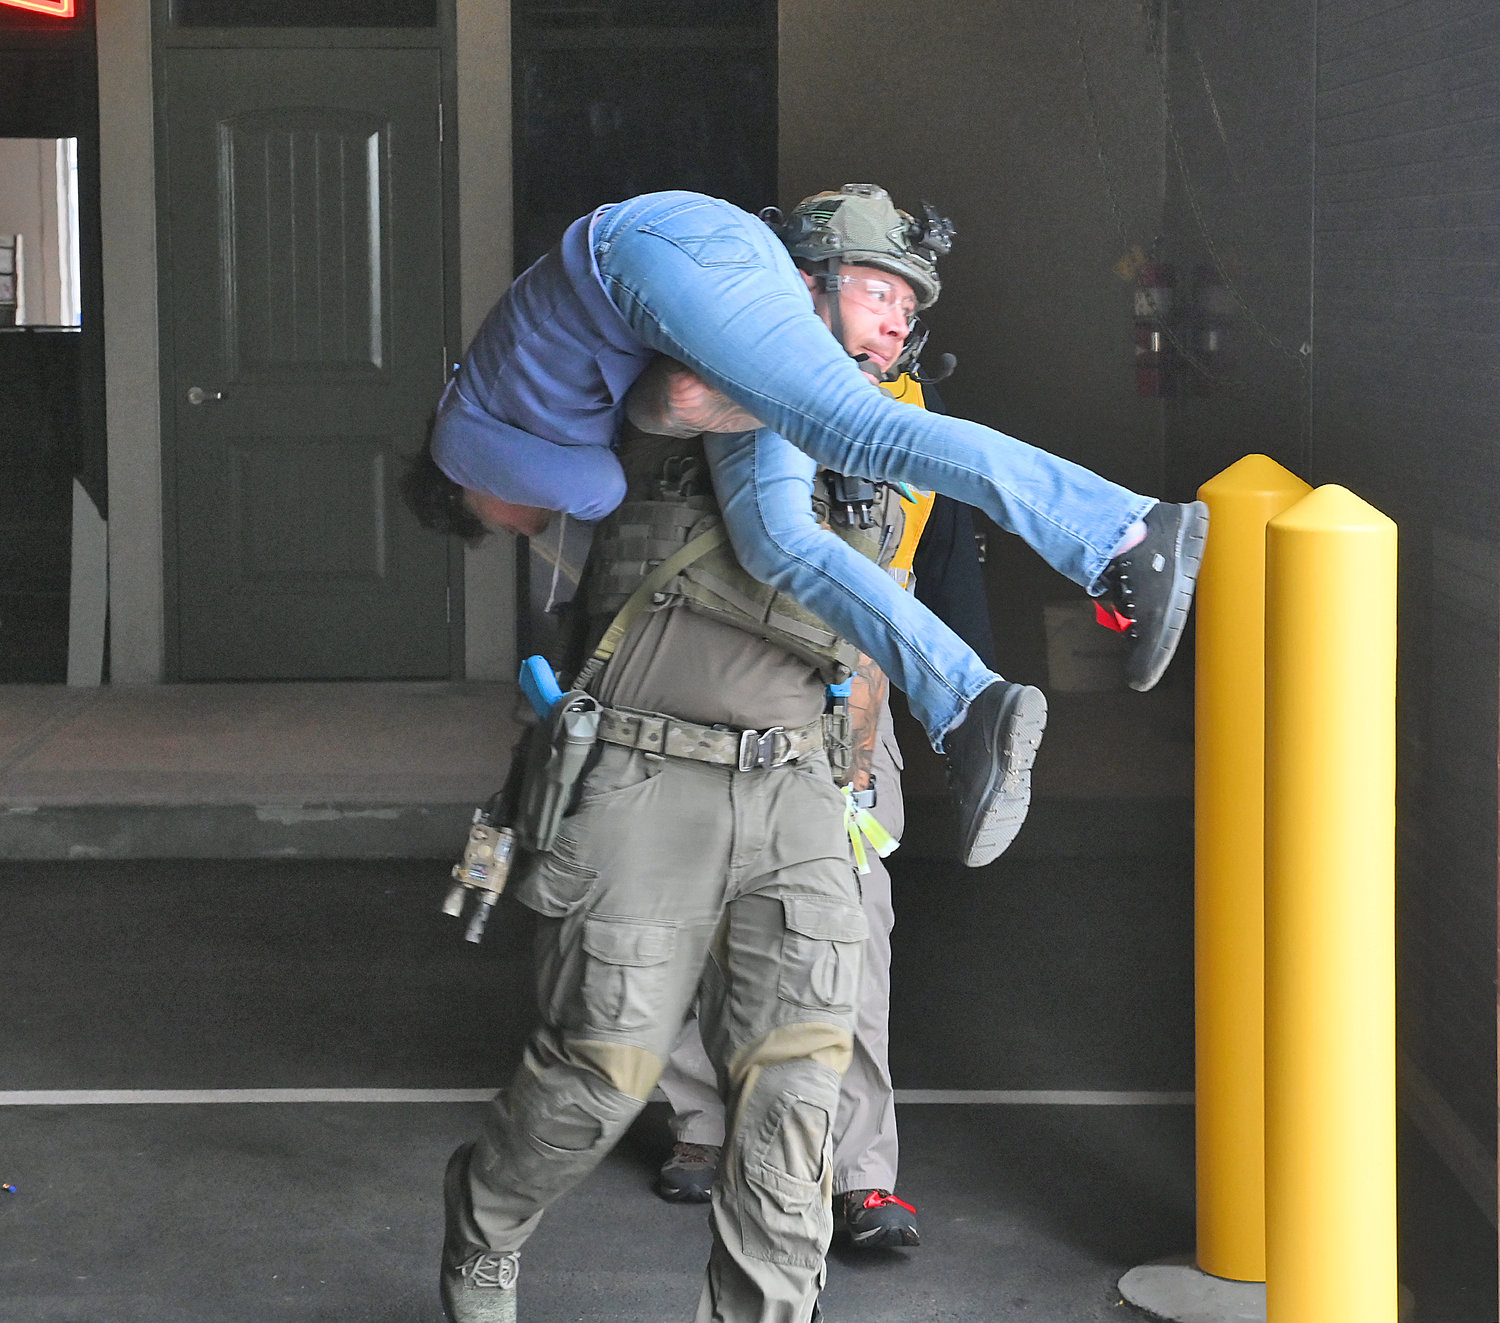 A role-player is carried to safety by a member of the Erie County Sheriff's SWAT team during a training scenario at the New York State Preparedness Training Center in Whitestown.